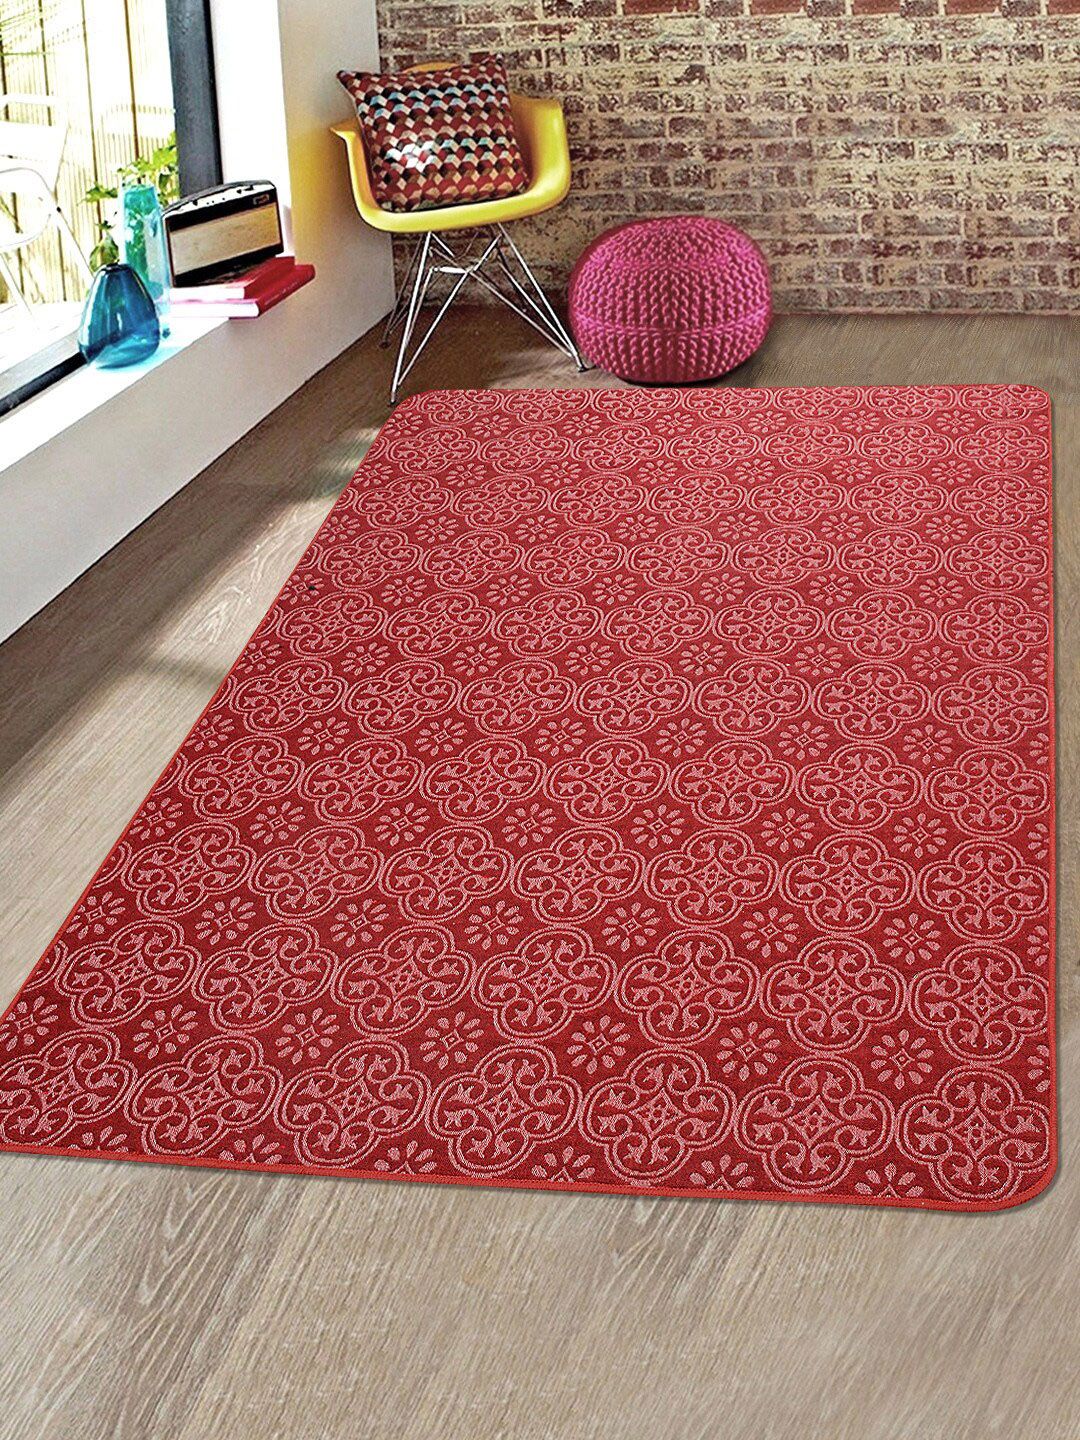 Saral Home Red & White Floral Printed Anti-Skid Carpet Price in India